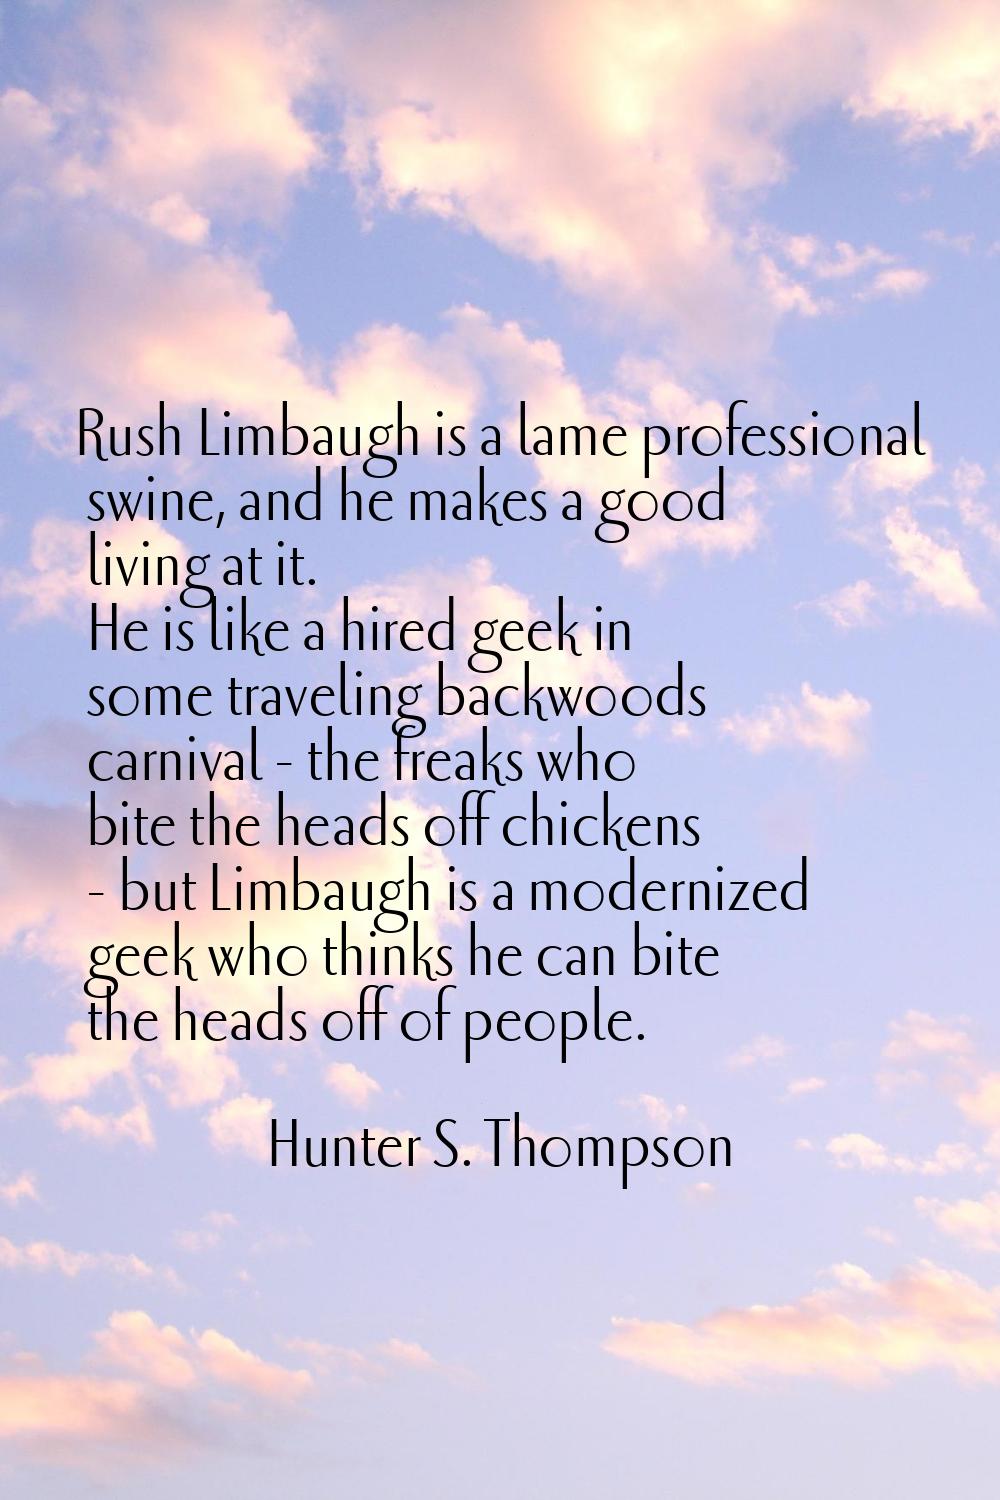 Rush Limbaugh is a lame professional swine, and he makes a good living at it. He is like a hired ge